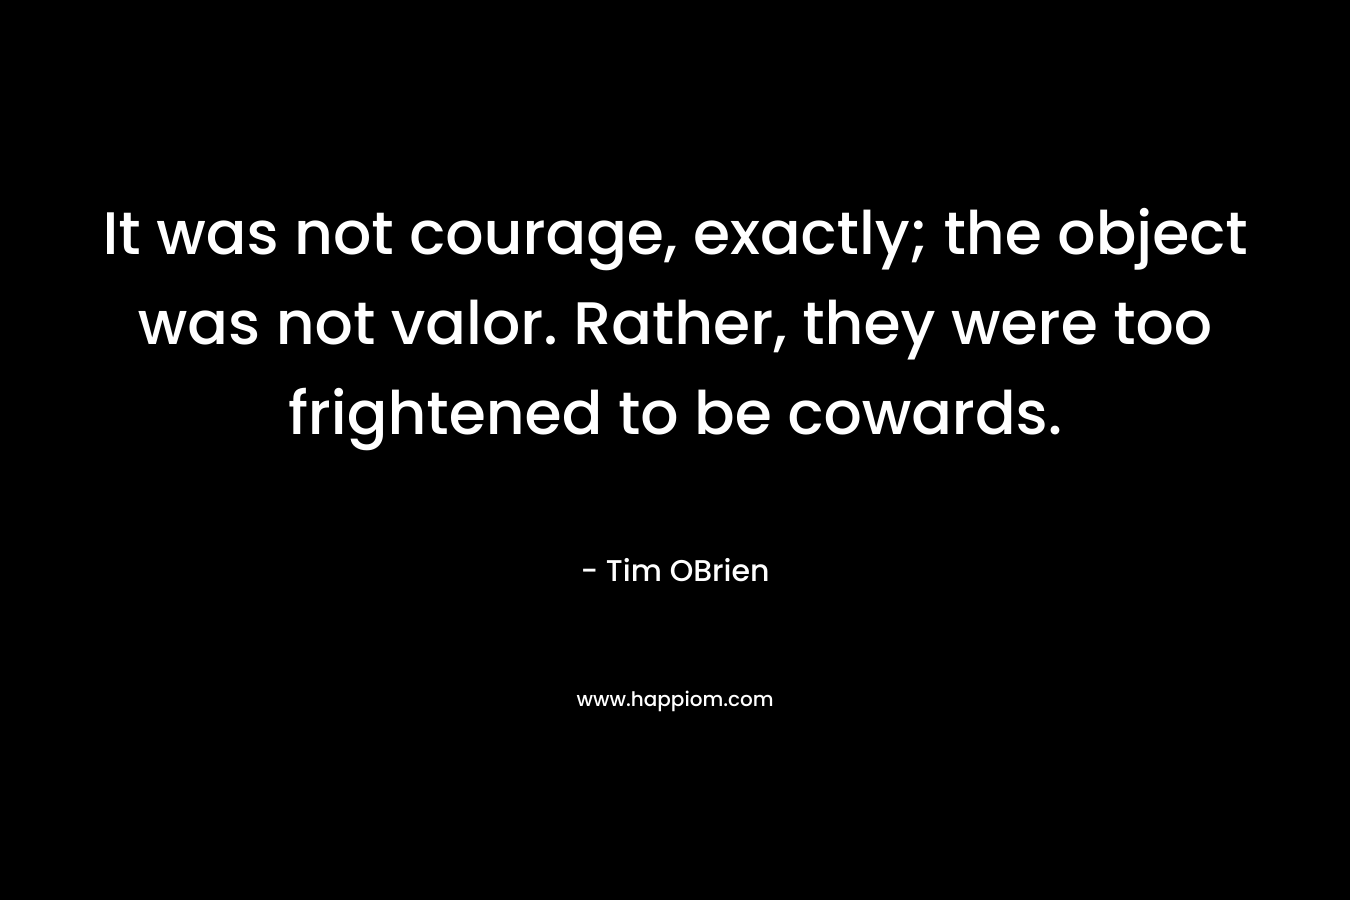 It was not courage, exactly; the object was not valor. Rather, they were too frightened to be cowards.